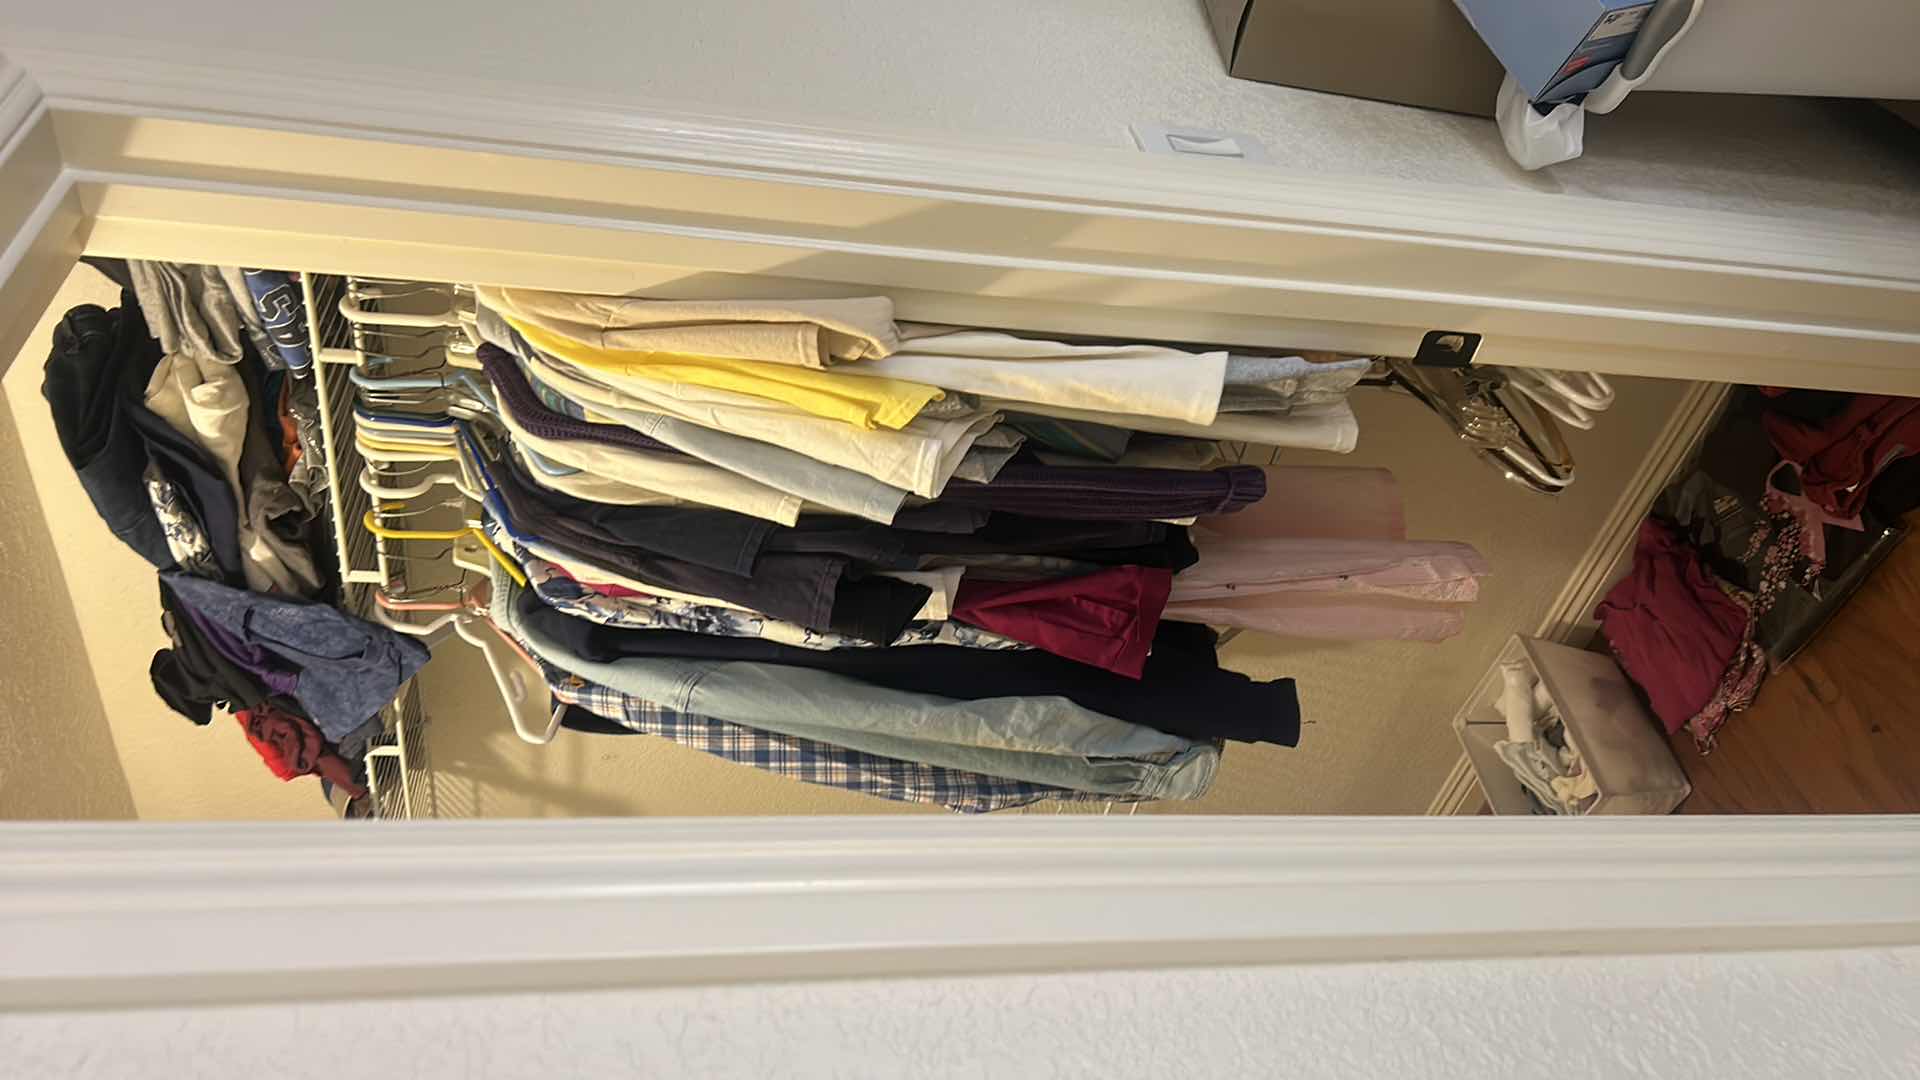 Photo 1 of CONTENTS RIGHT SIDE OF CLOSET- WOMEN AND MENS CLOTHING